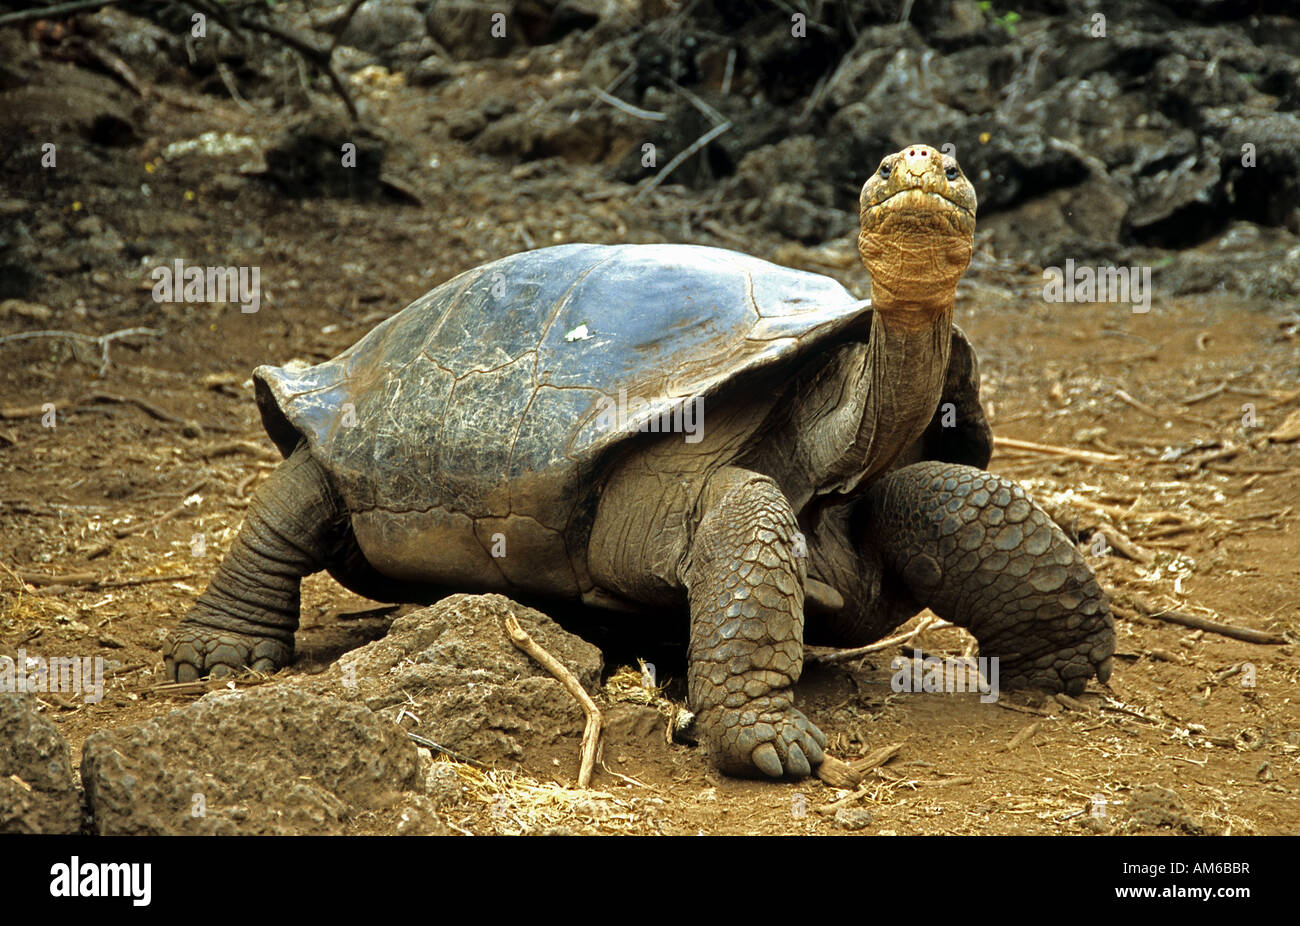 Tortue géante, Geochelone elephantopus, Galapagos Banque D'Images